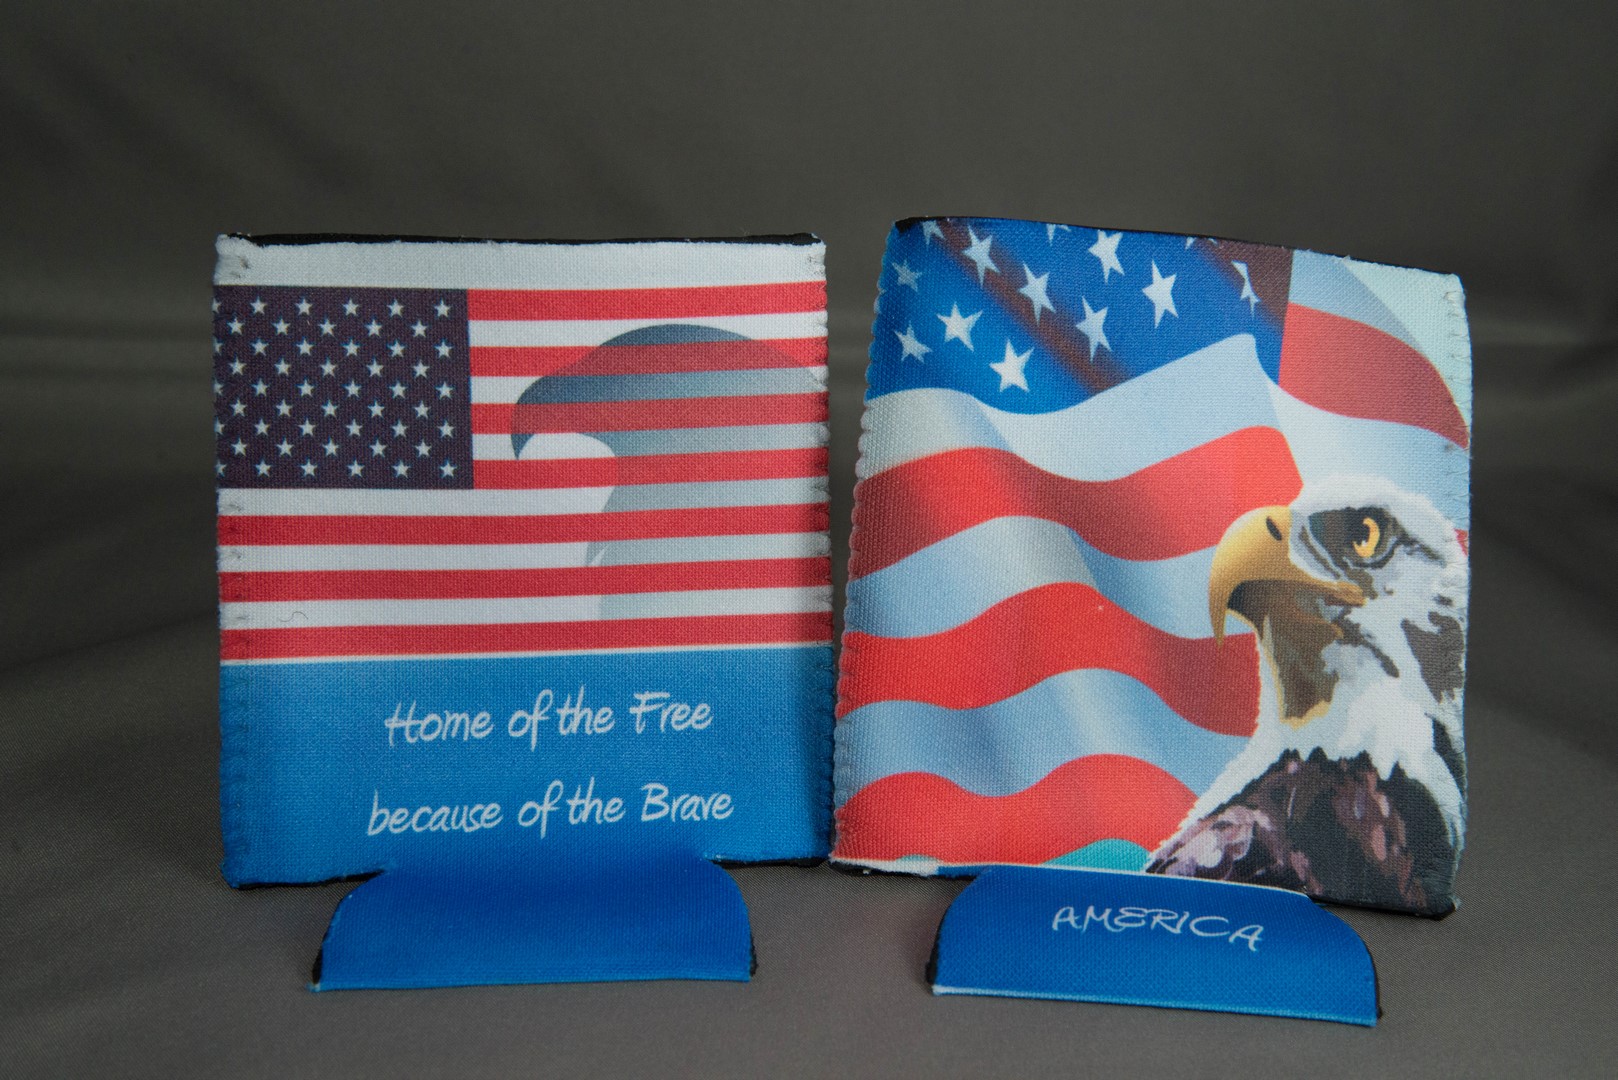 America made with sublimation printing